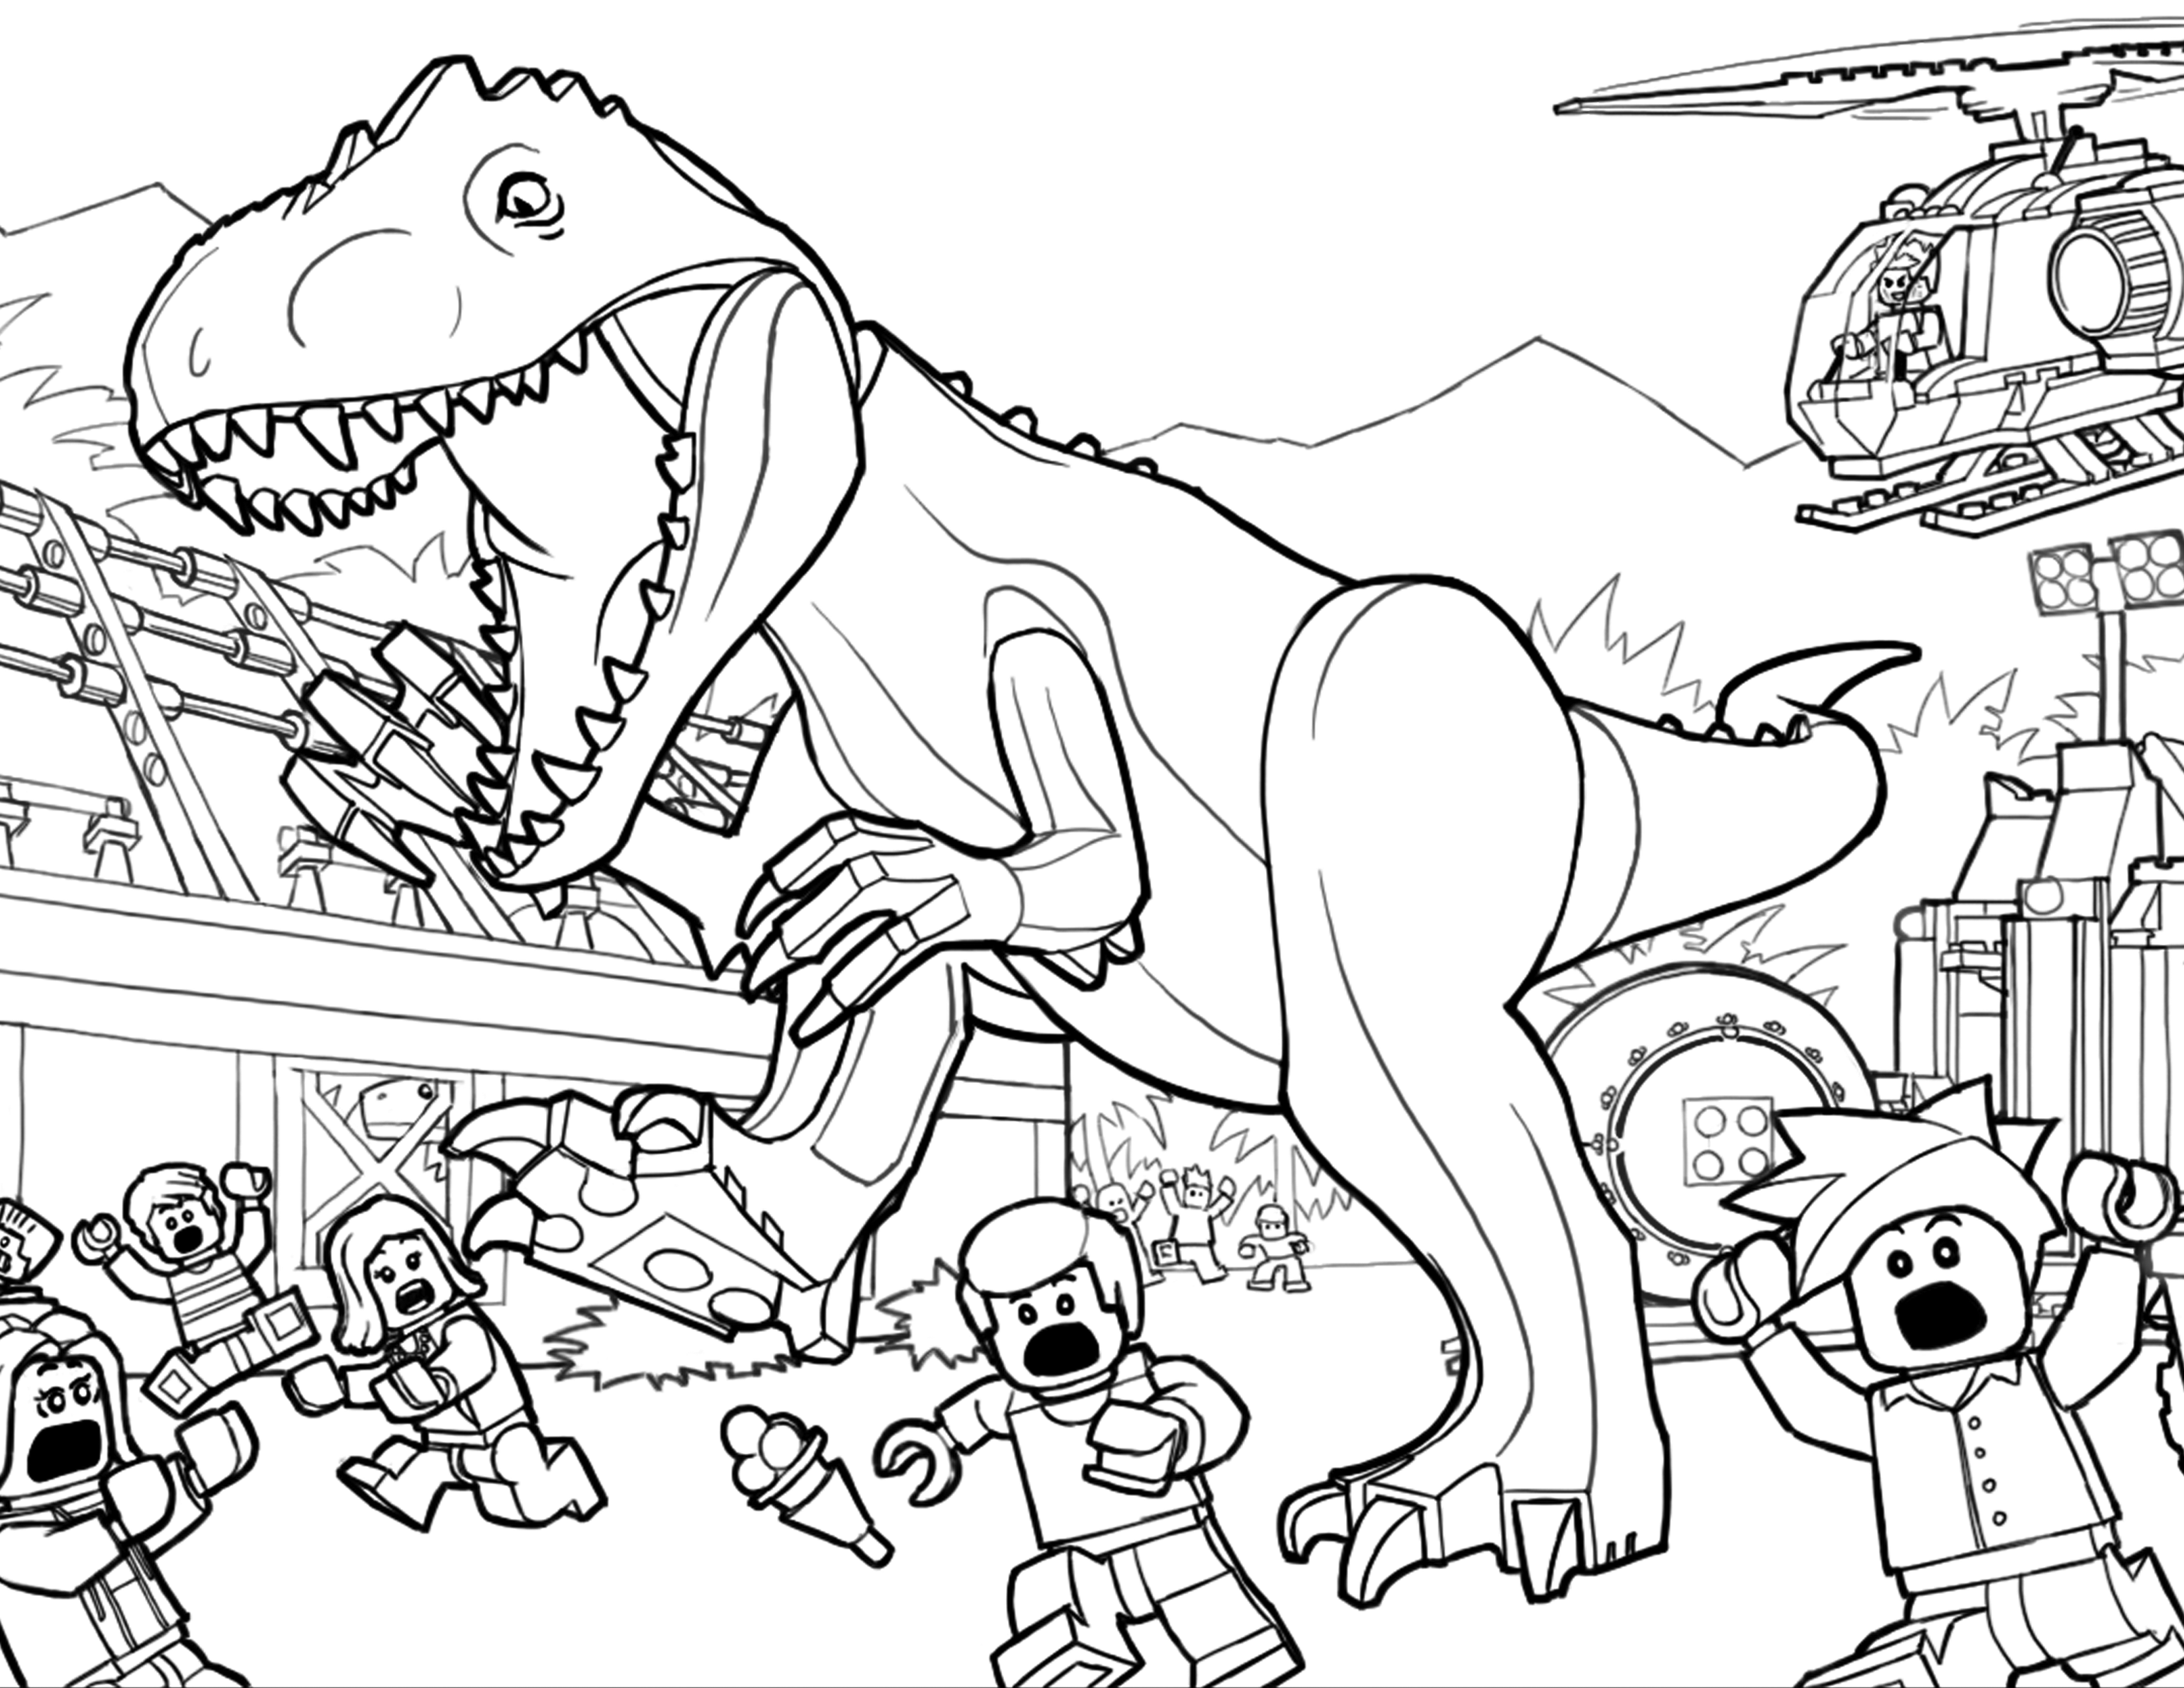 trex-coloring-pages-best-coloring-pages-for-kids